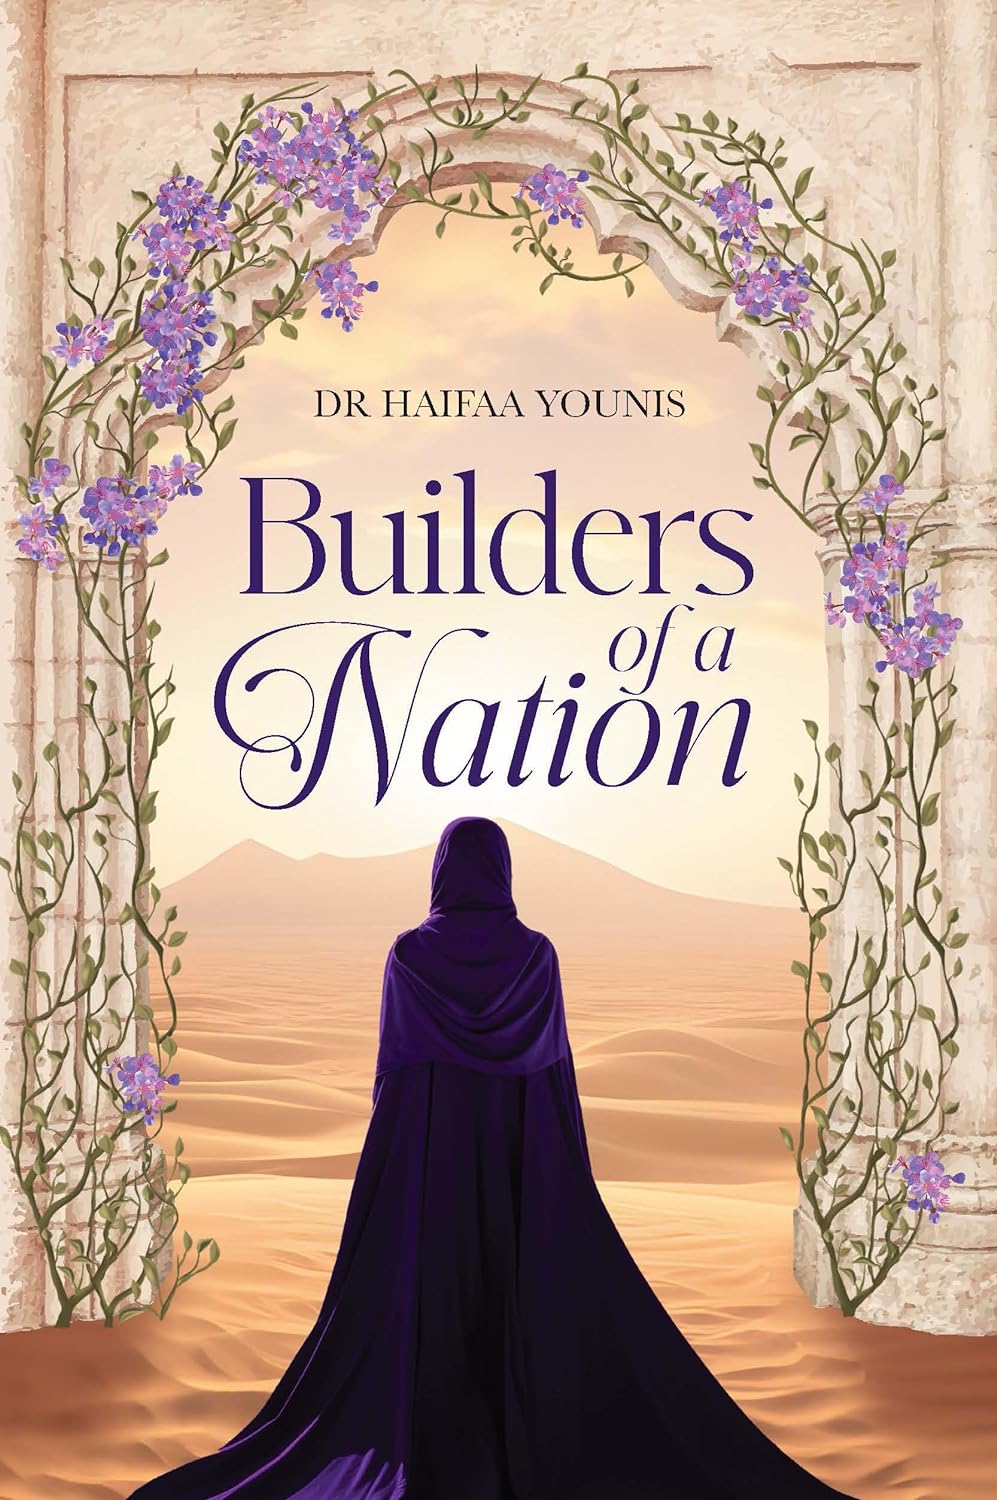 Builders of a Nation by: Dr Haifaa Younis